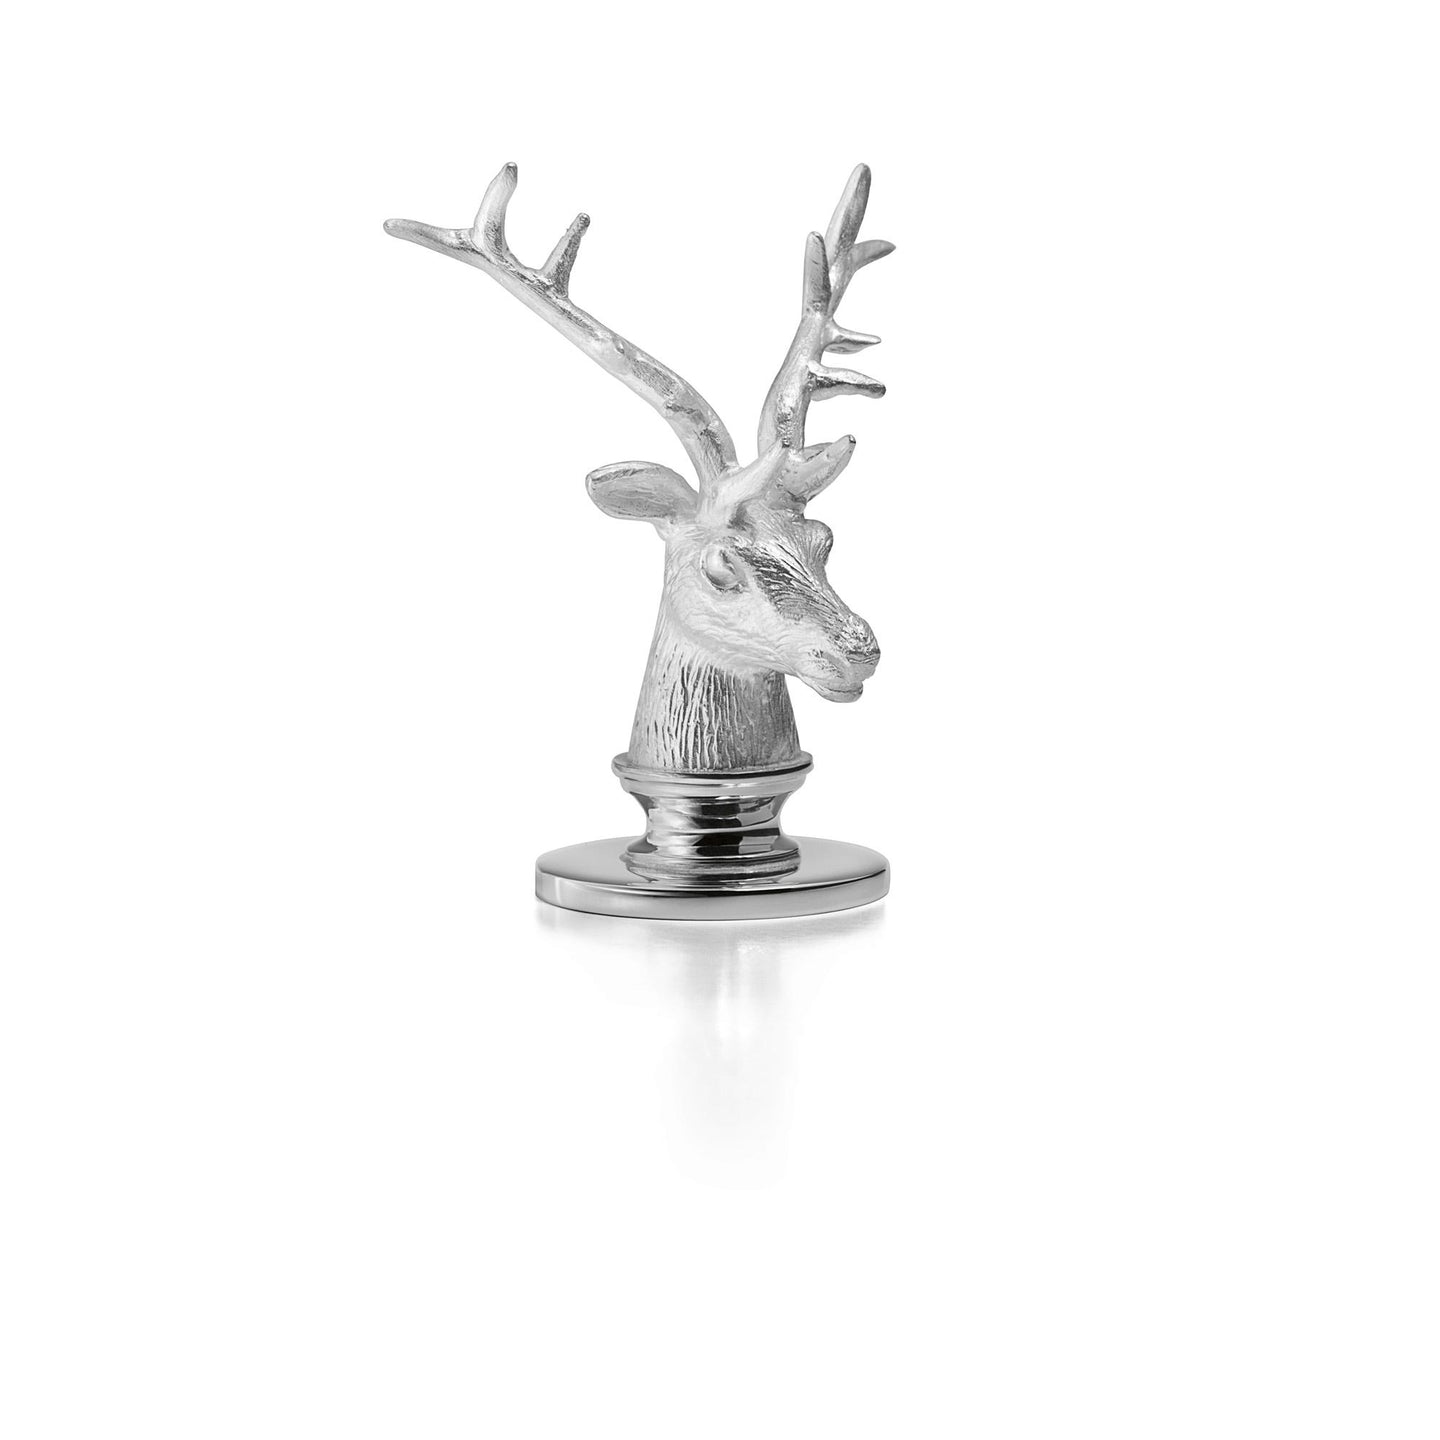 Stag Head Place Card Holders in Sterling Silver, Set of 6